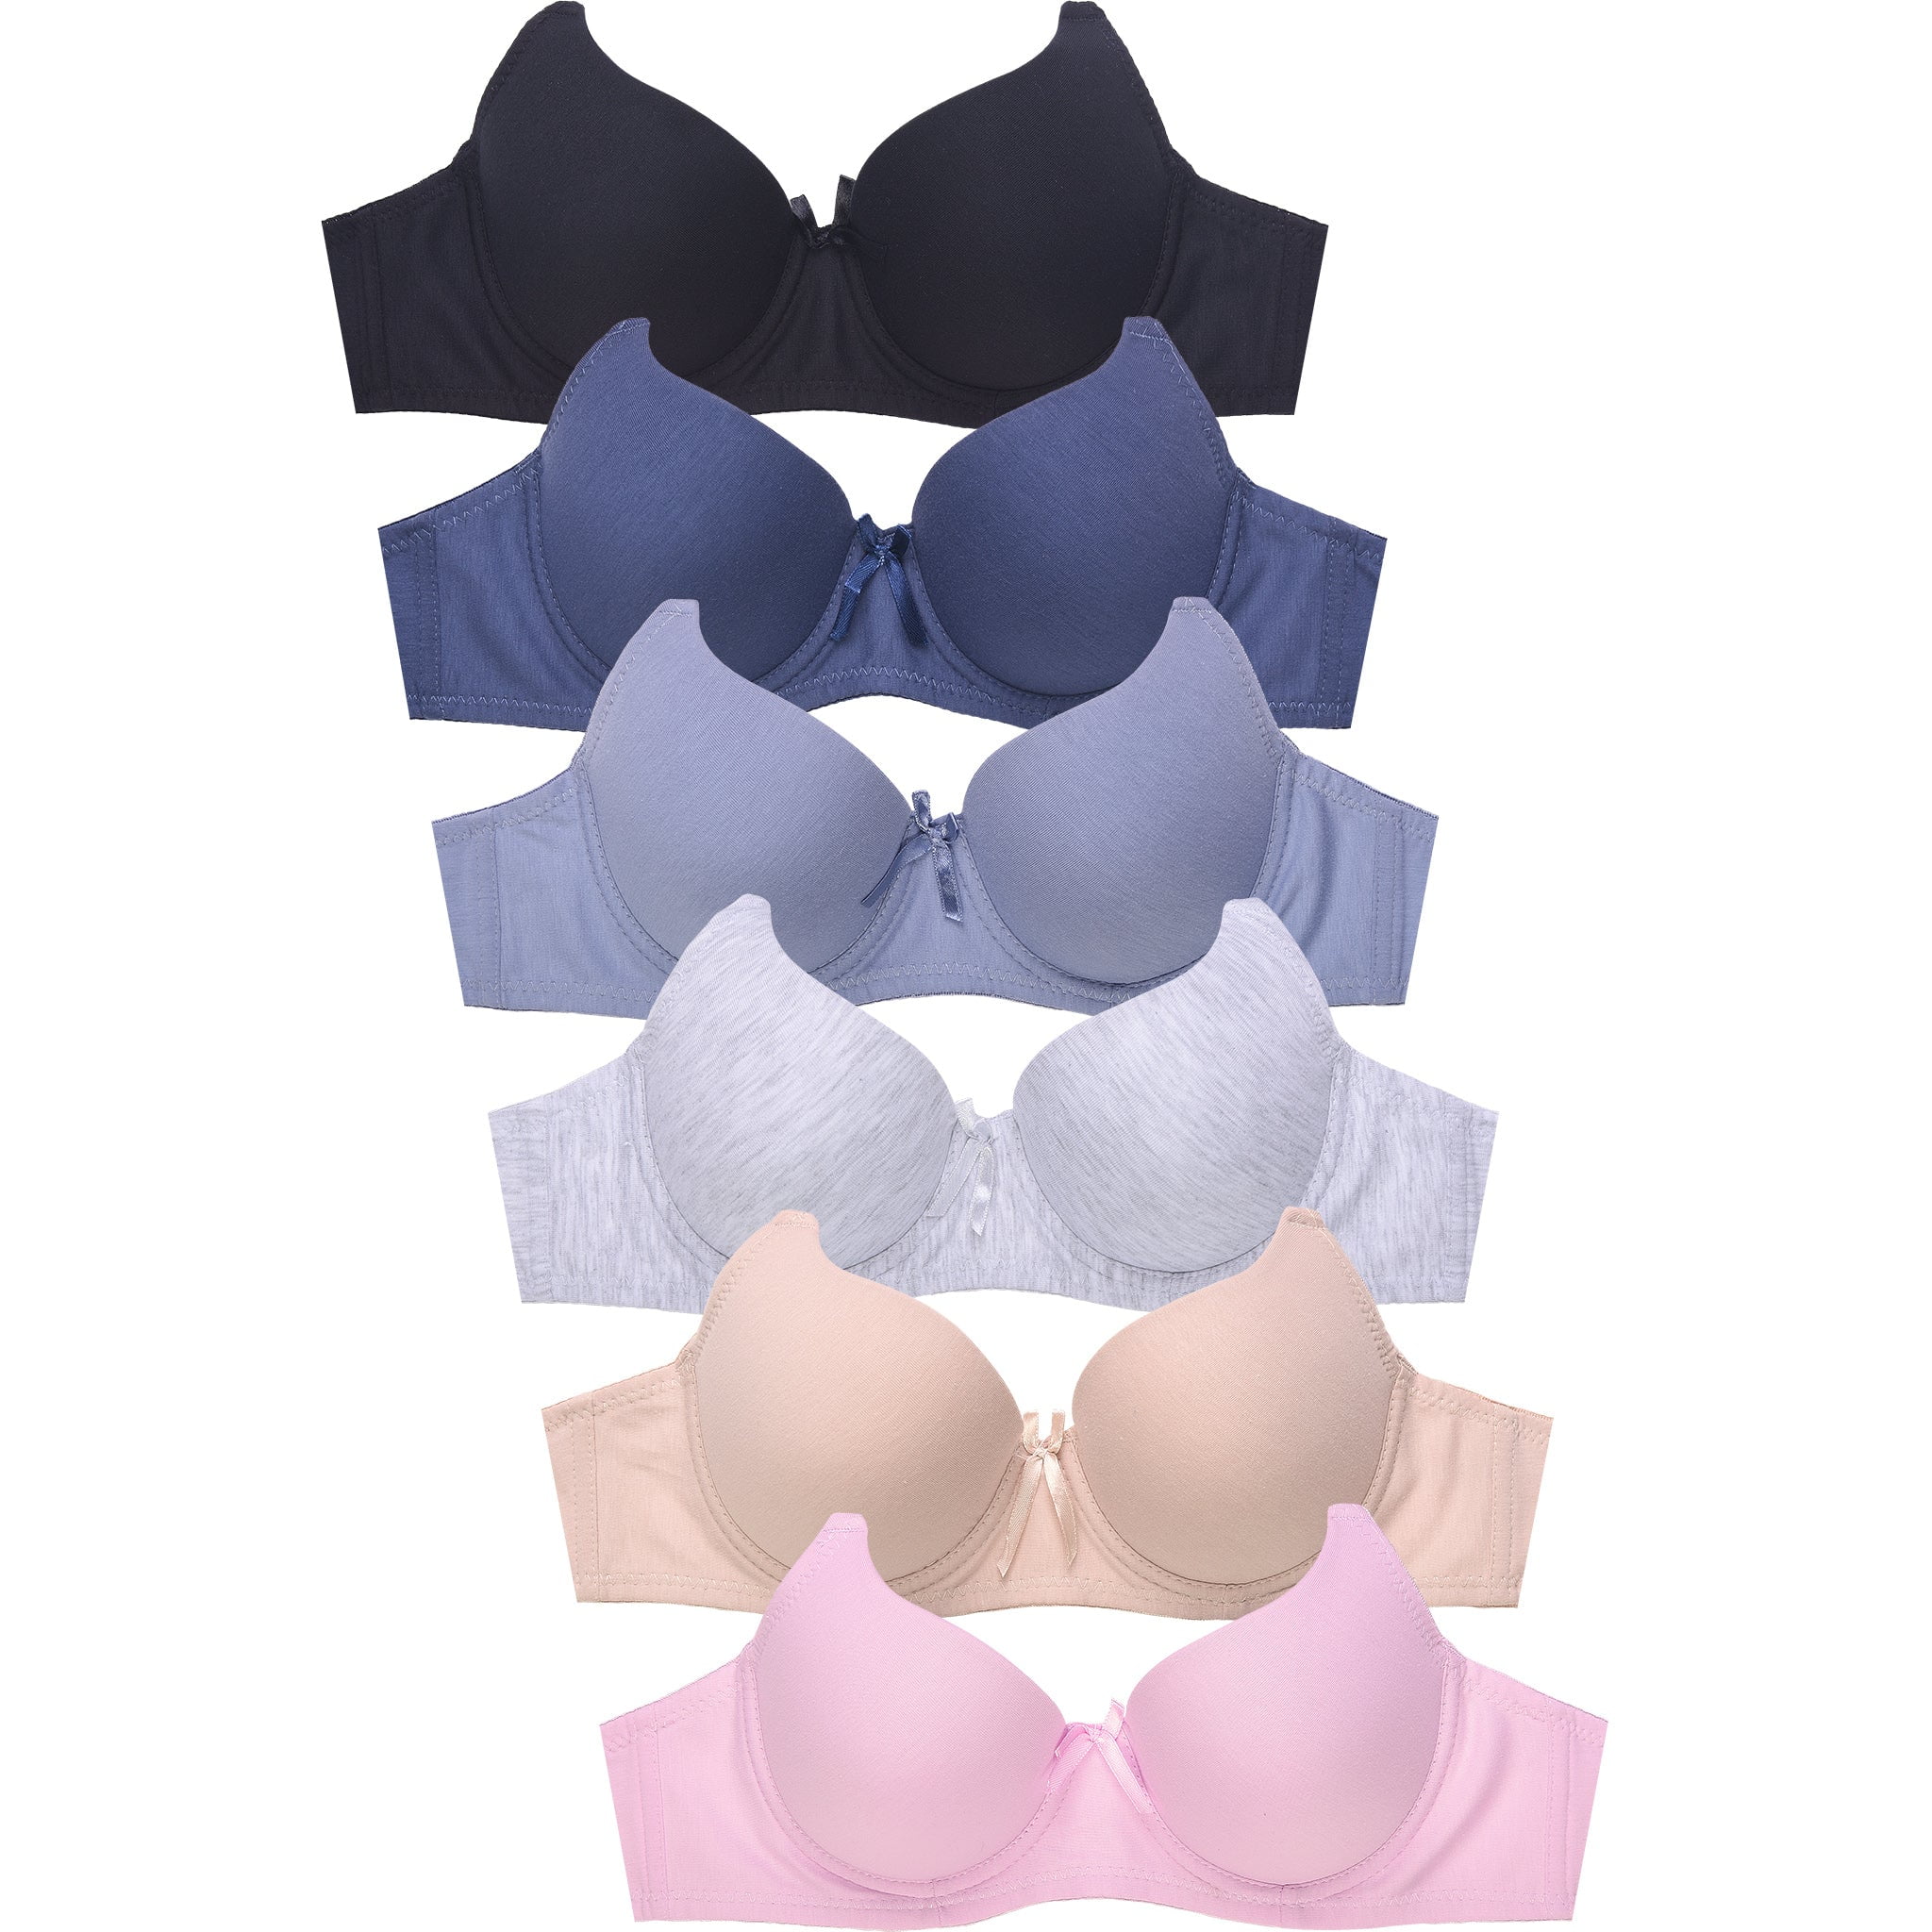 247 Frenzy Women's Essentials Sofra or Mamia PACK OF 6 Full Coverage Solid  Cotton Blend Bras 